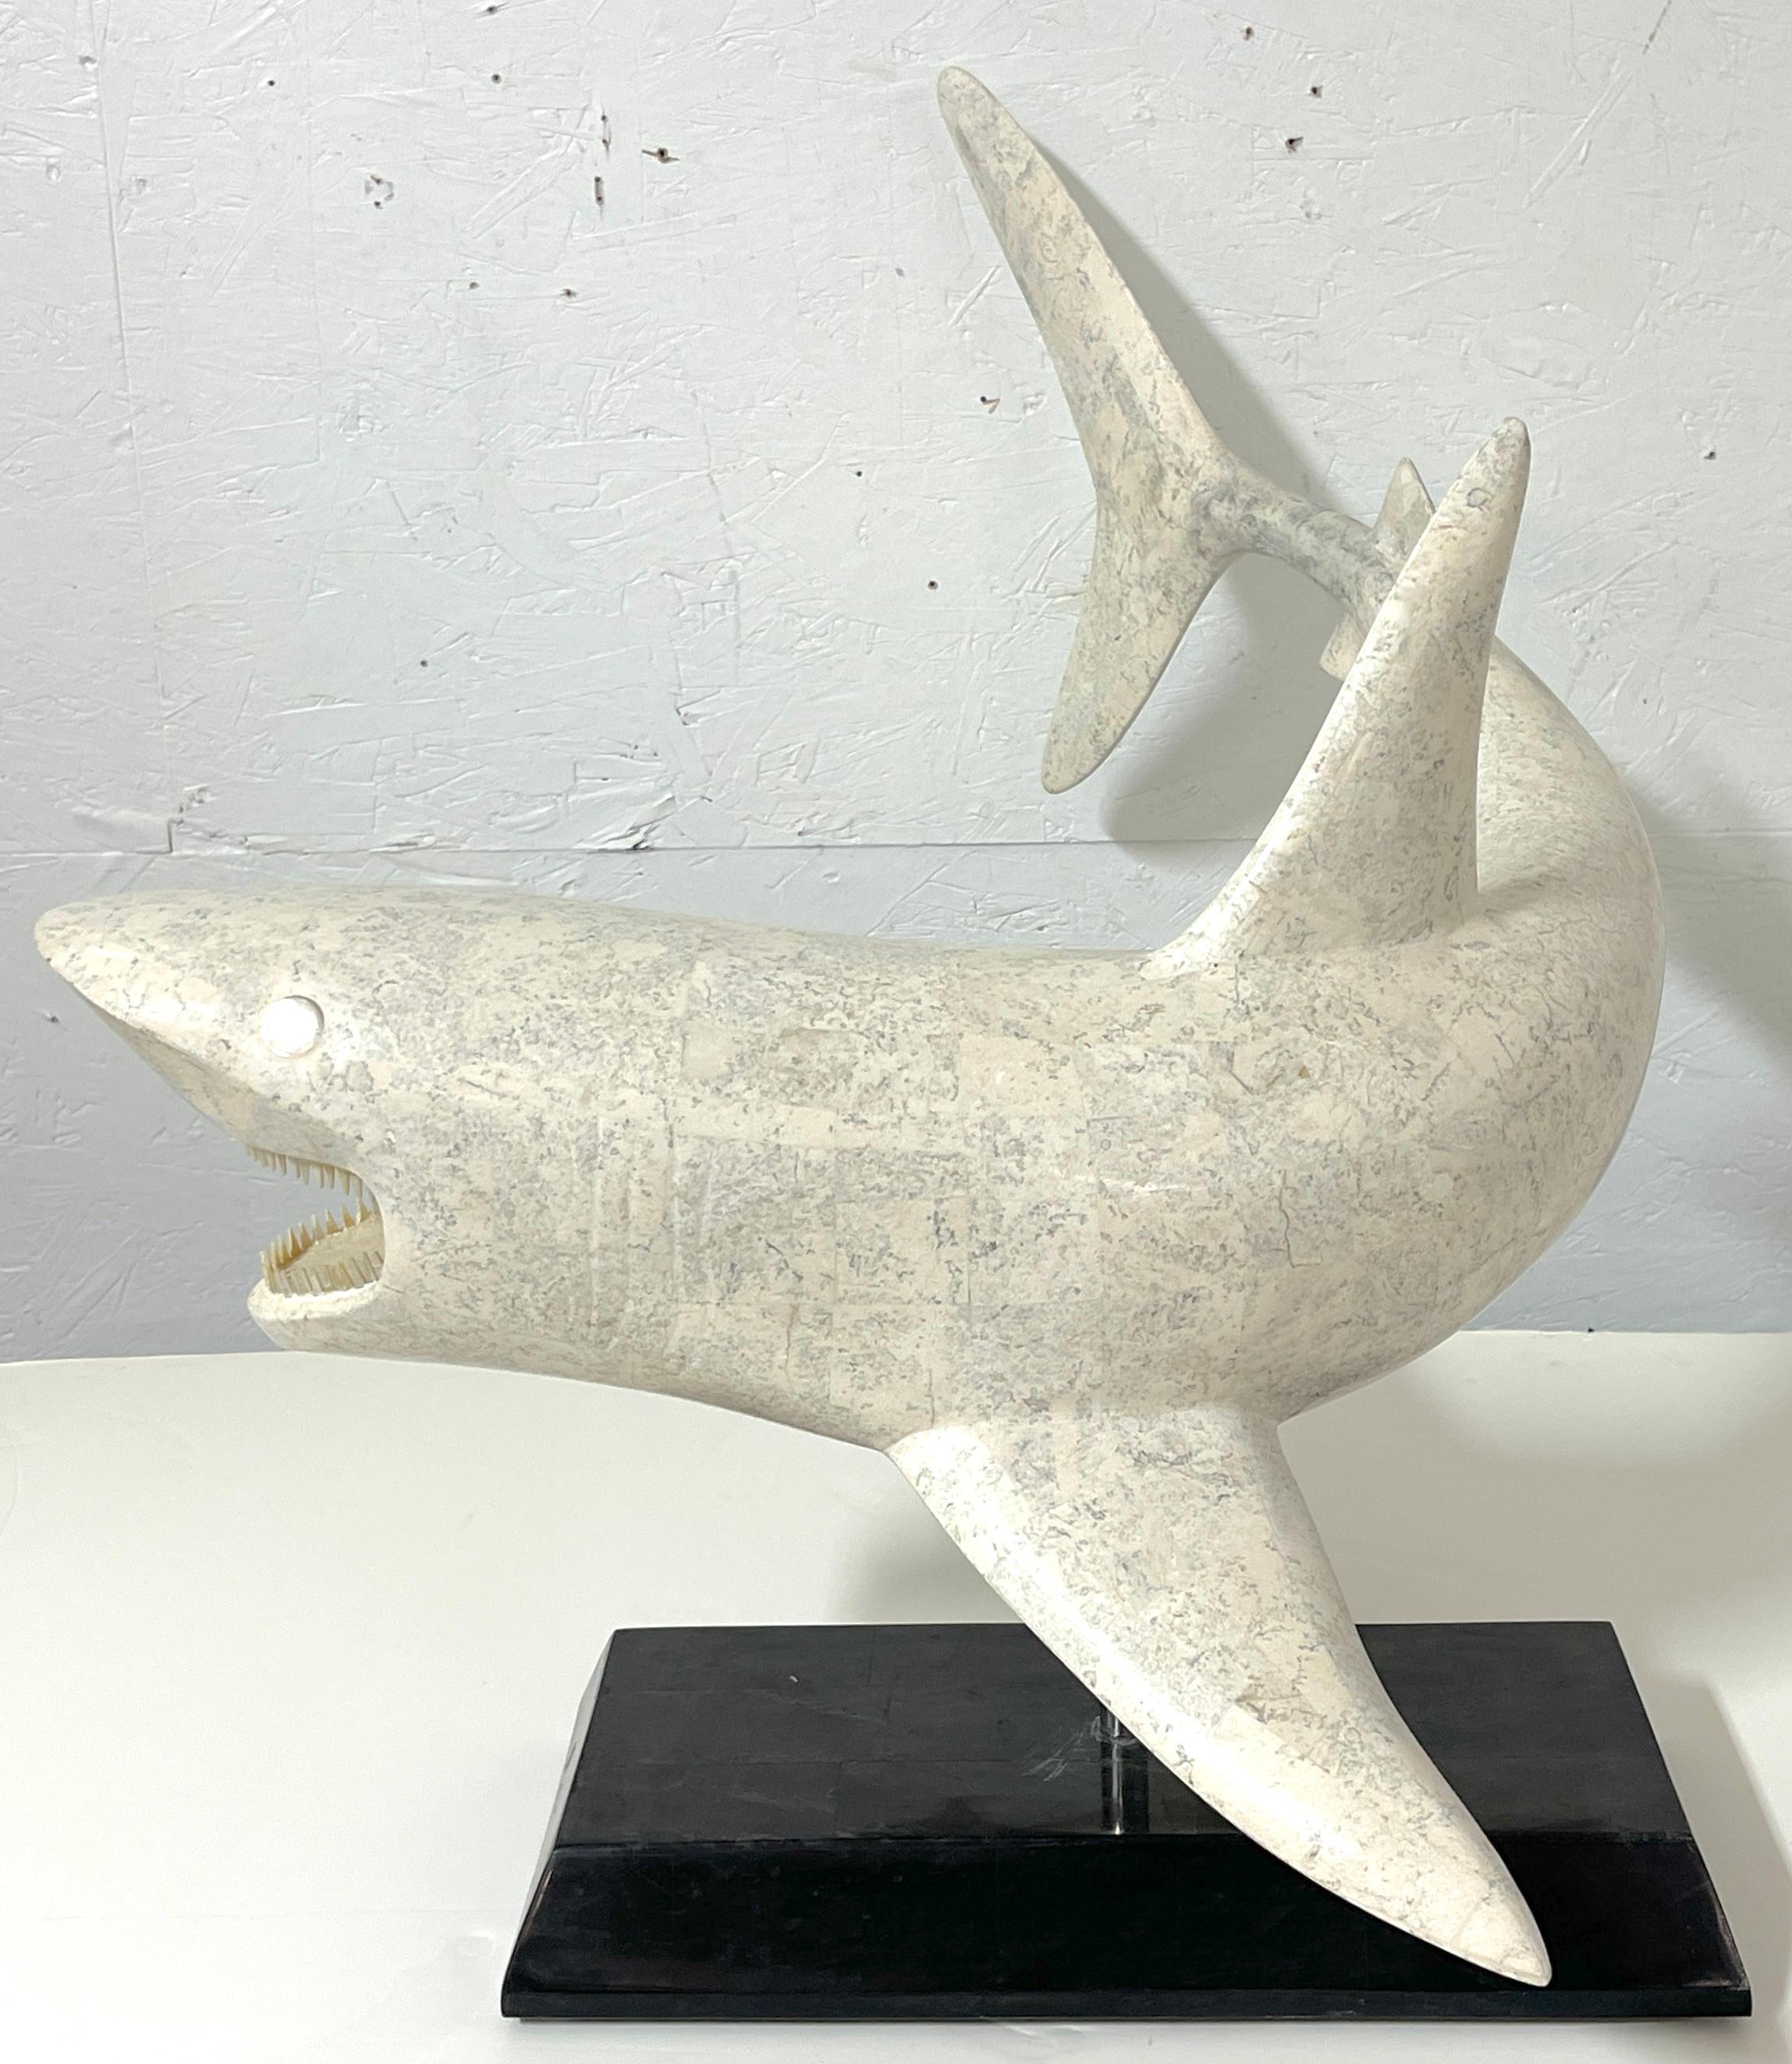 Large Modern Inlaid Tessellated Stone Sculpture of a Great White Shark   For Sale 3